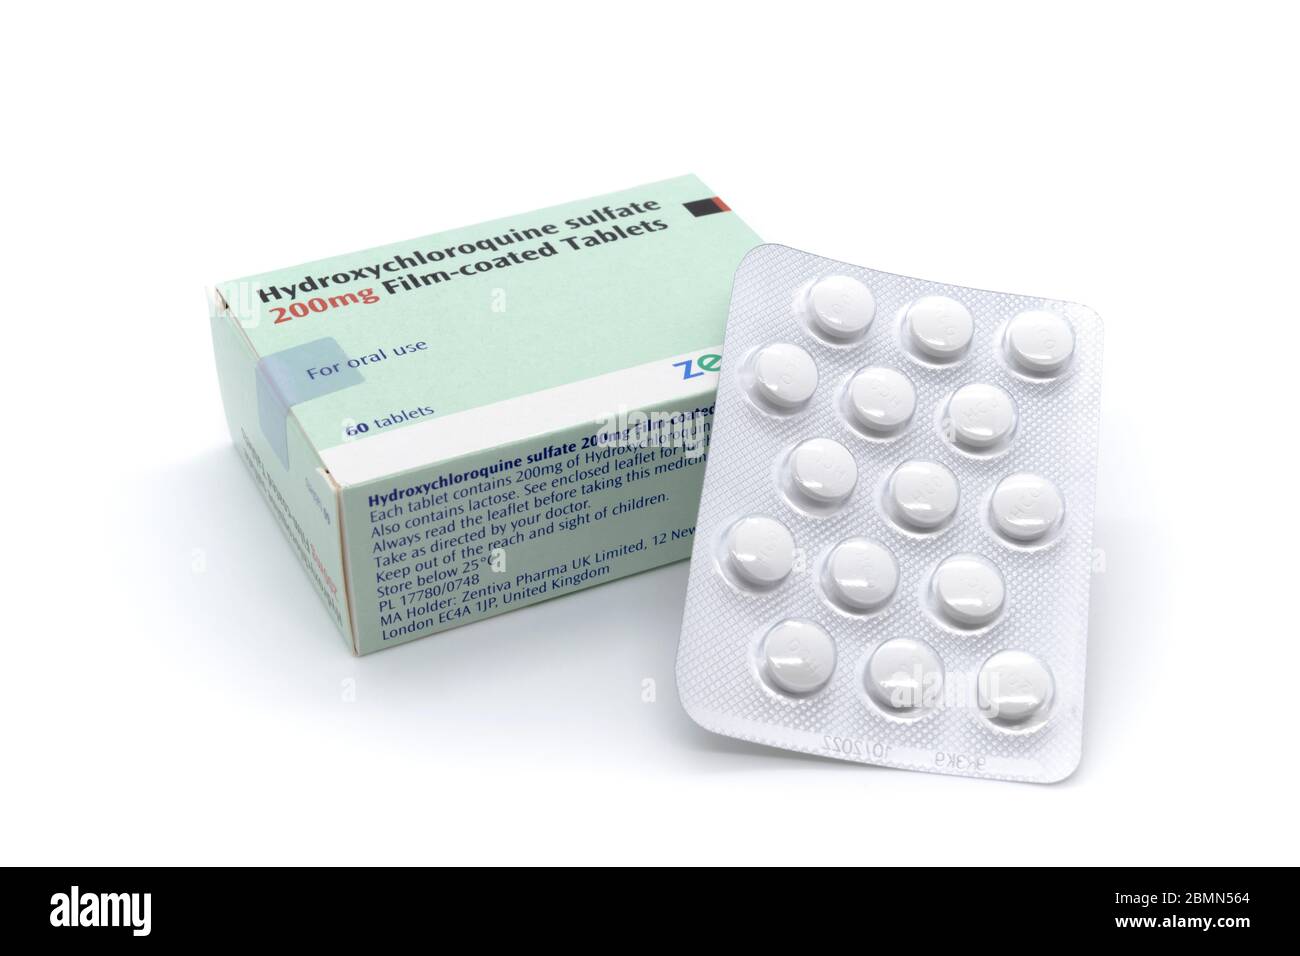 Hydroxychloroquine 200mg tablets Hydroxychloroquine tablets formerly Plaquenil tablets possible COVID19 treatment plan Stock Photo